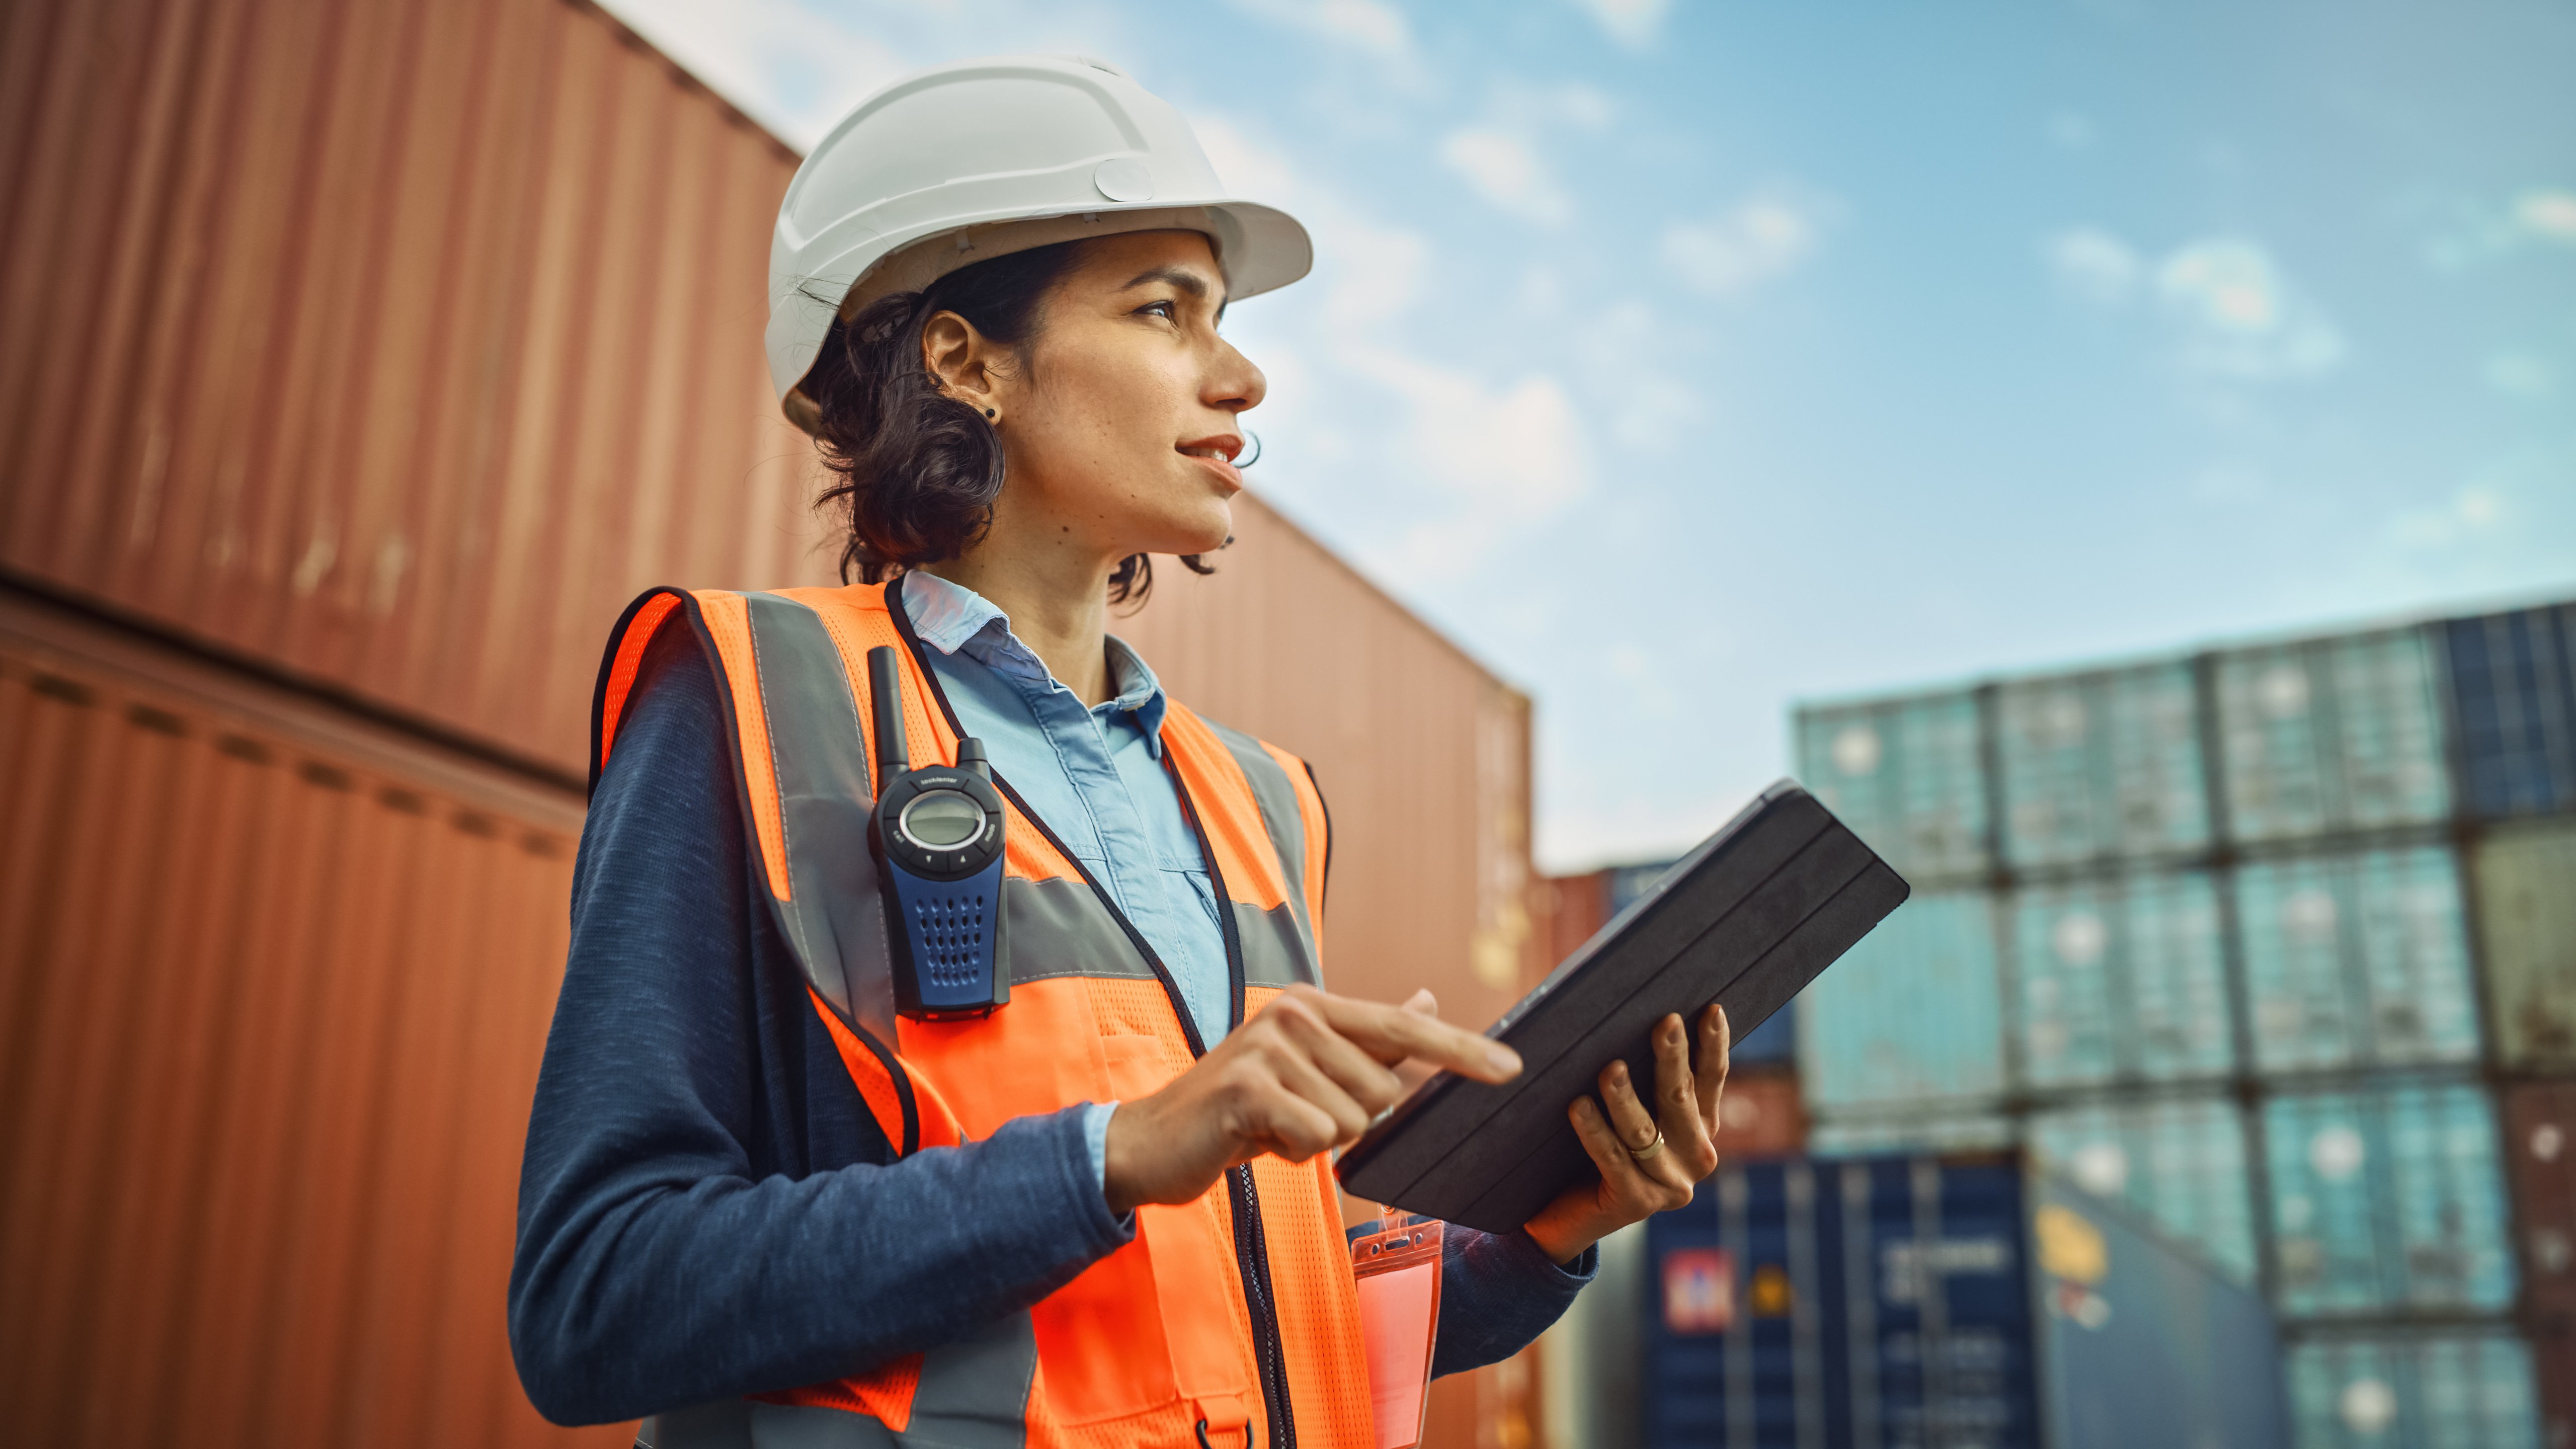 Woman in safety vest and hard hat standing near storage containers holding a tablet